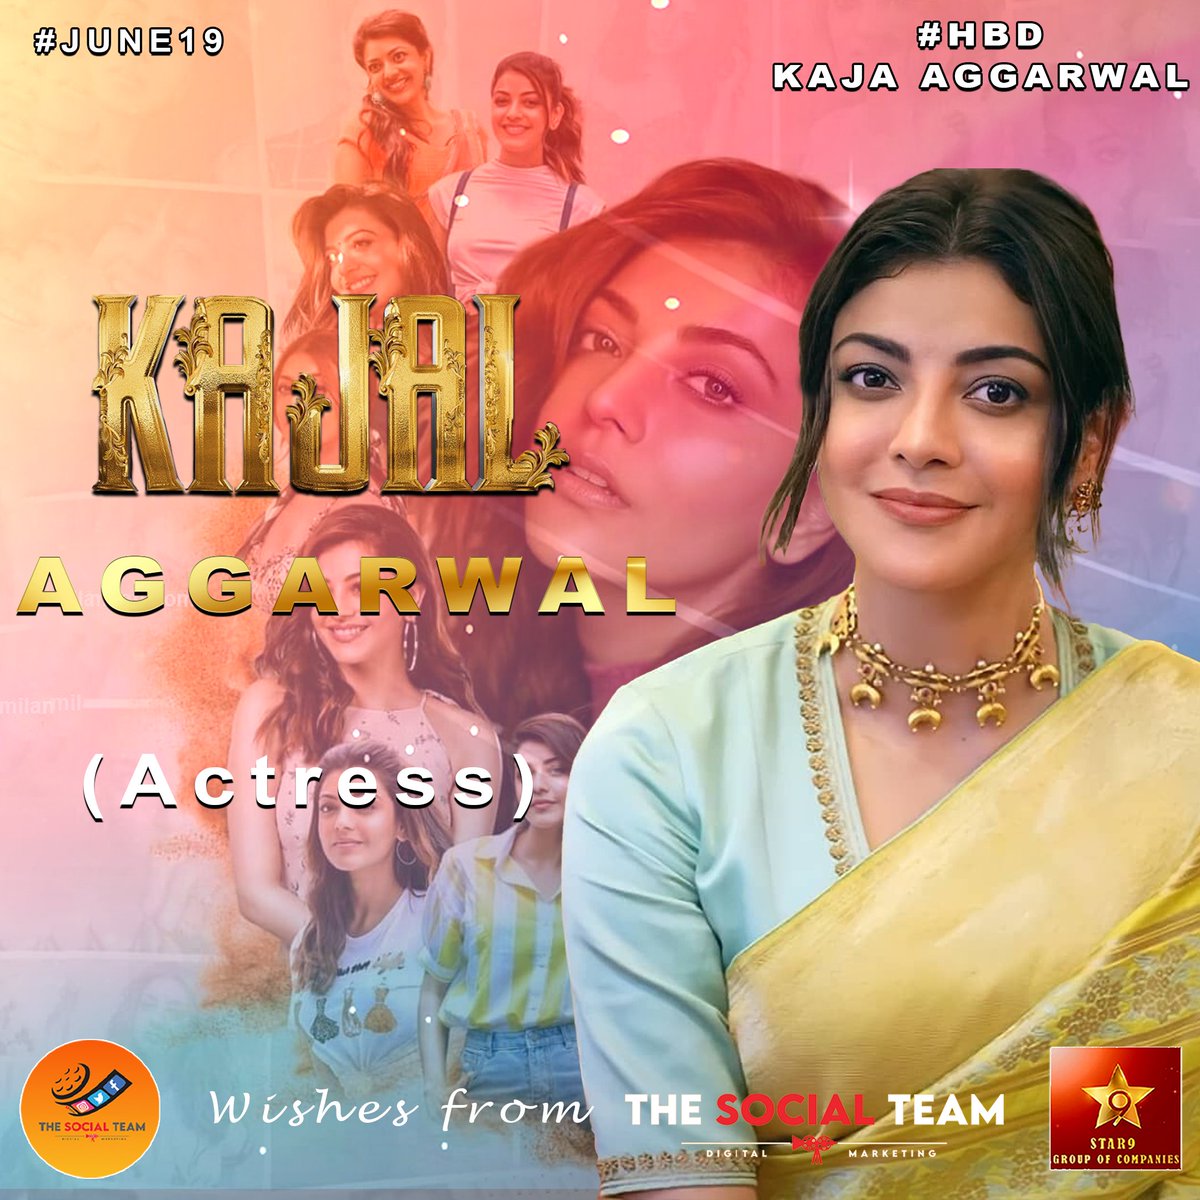 HAPPY BIRTHDAY Wishes From The Social Team 🥳🥳🎉🎊#HBDKajalAggarwal #KajalAggarwal #HappyBirthdayKajalAggarwal #HBDKajal #HBD